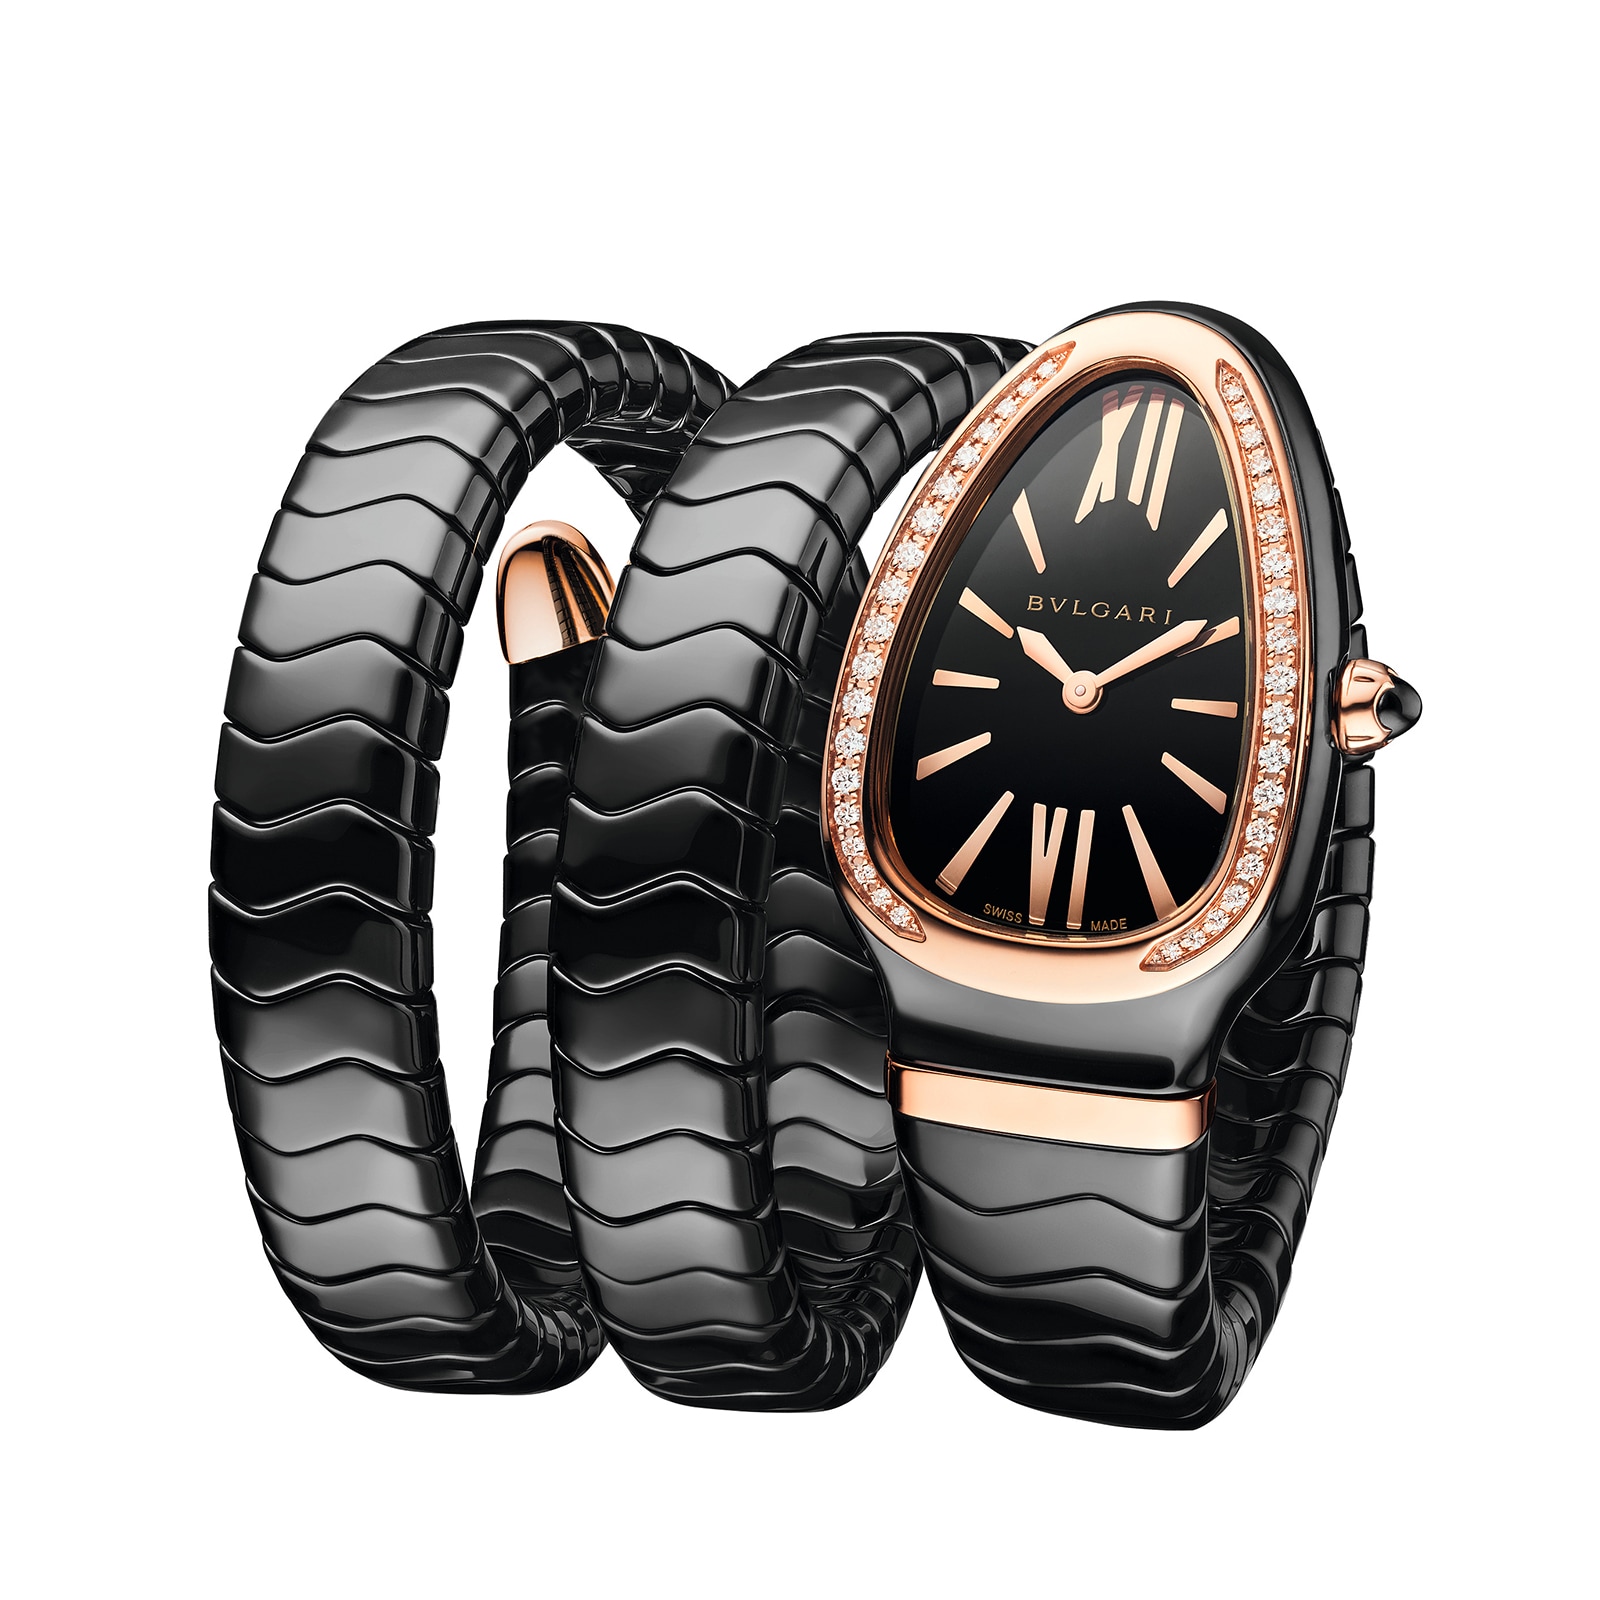 BVLGARI - Our brand partners - Group - The Watches of Switzerland Group